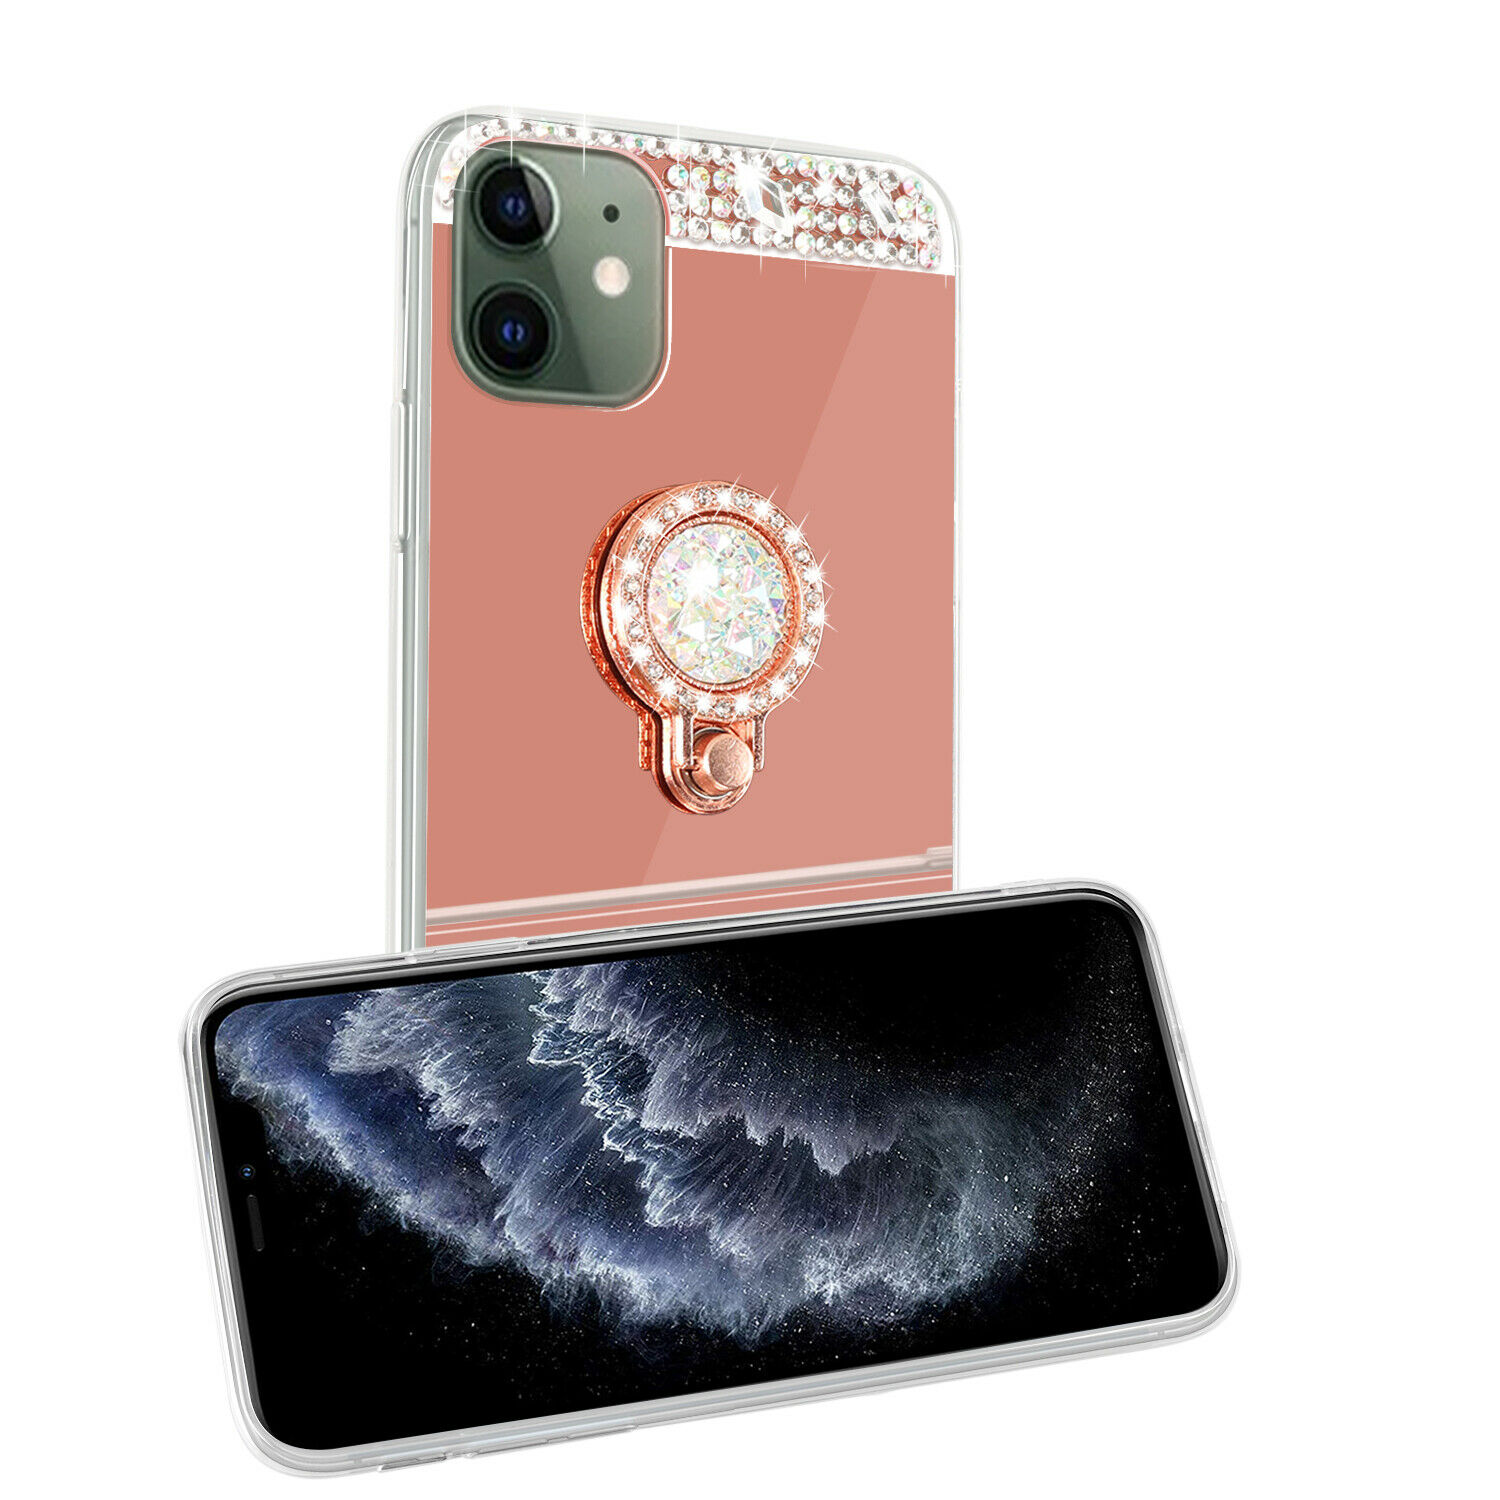 Mignova iPhone 11 6.1 inch Case, Luxury Glitter Shiny Diamond Mirror Makeup Girls Protective Case with Bling Rhinestone 360 Degree Rotation Ring Kickstand(Rose Gold) - image 1 of 7